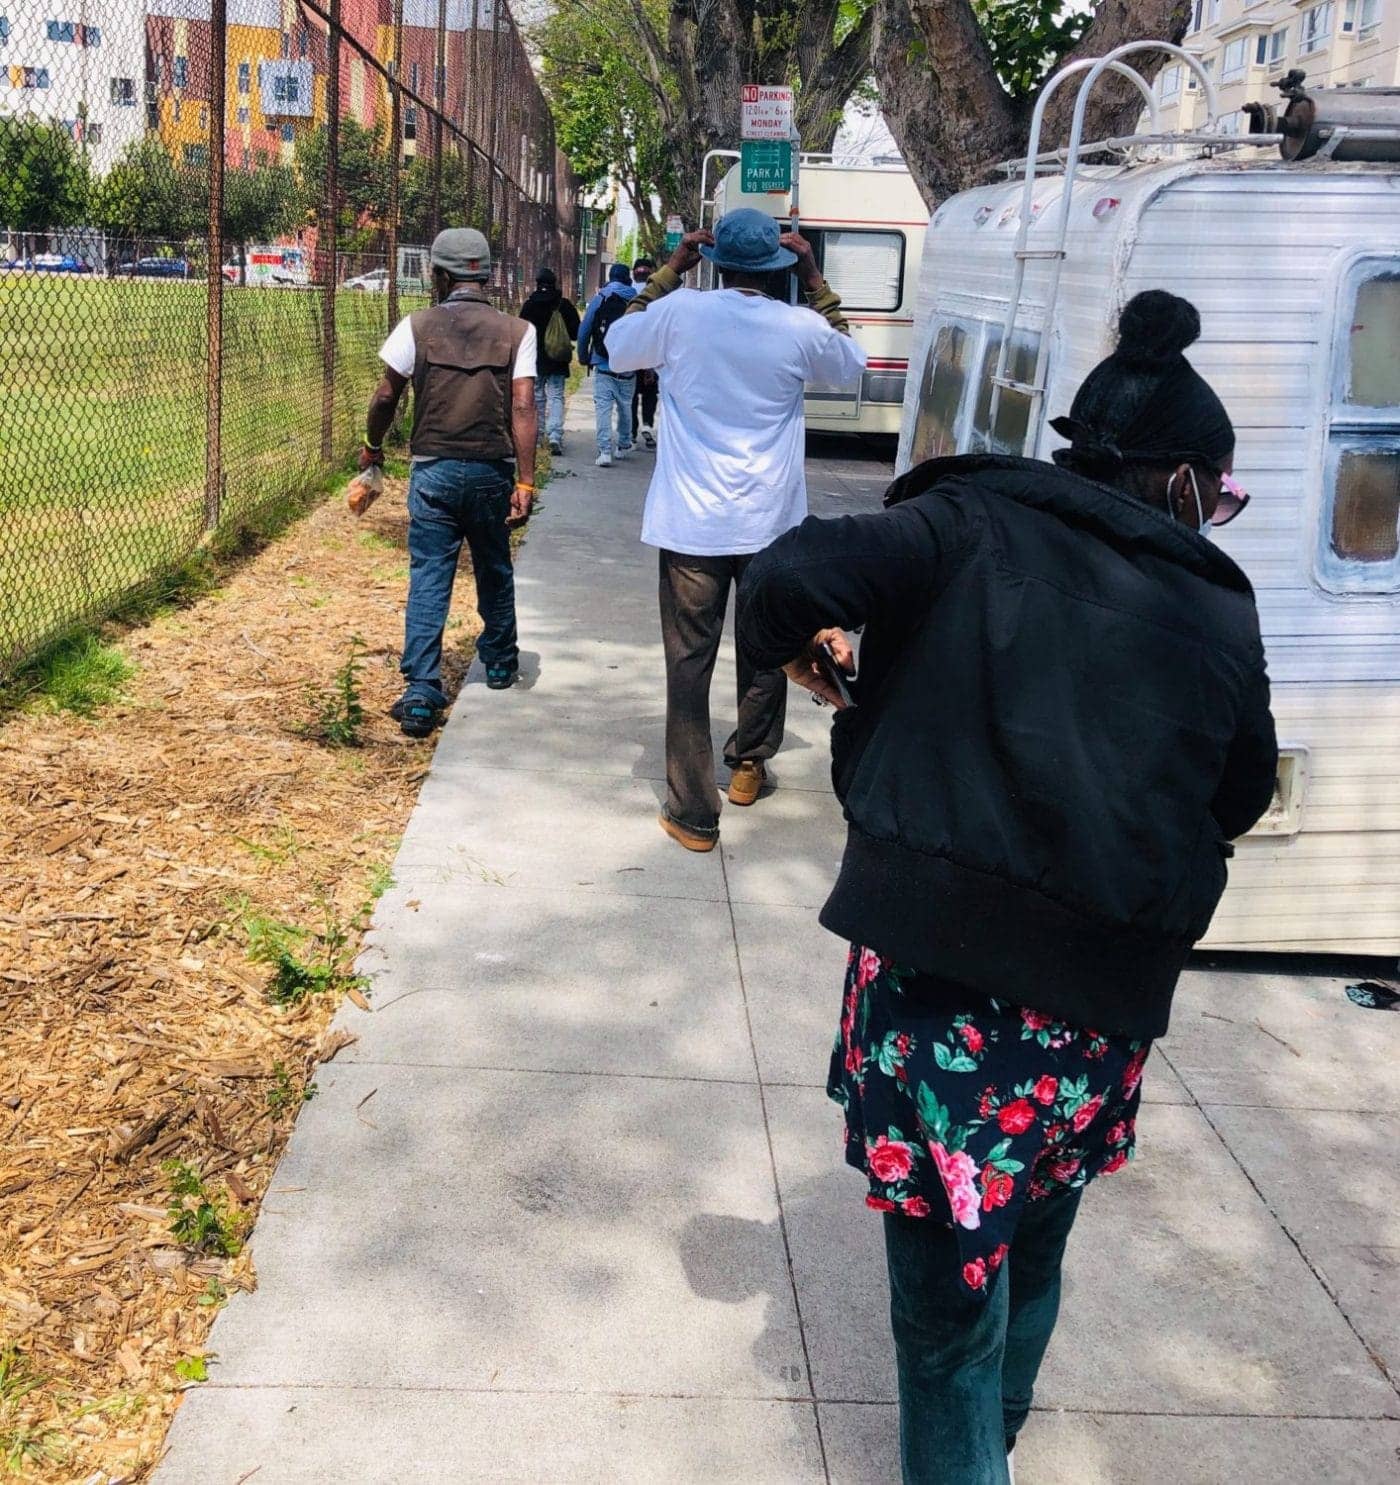 Beds-4-Bayview-Michael-Bennett-of-Bayview-Senior-Services-at-Rosa-Parks-Senior-Center-leads-‘Wellness-Walk’-around-MLK-Park-1400x1485, Community seizes MLK Park as immediate COVID relief for unhoused neighbors, Local News & Views 